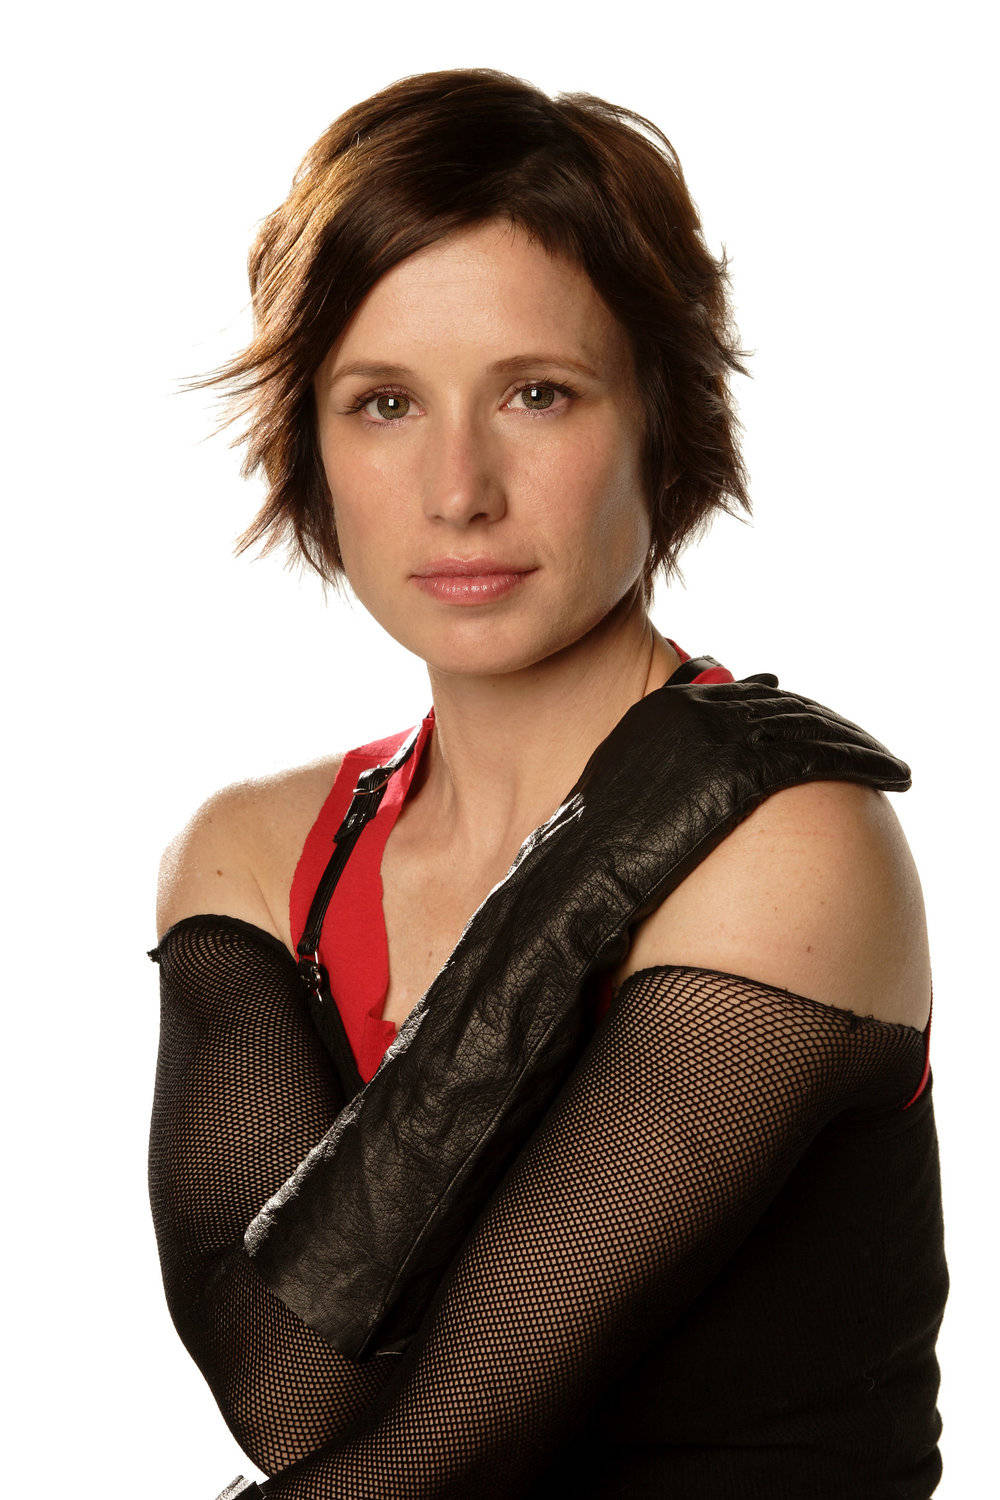 Download Shawnee Smith Black Gloves Wallpaper | Wallpapers.com